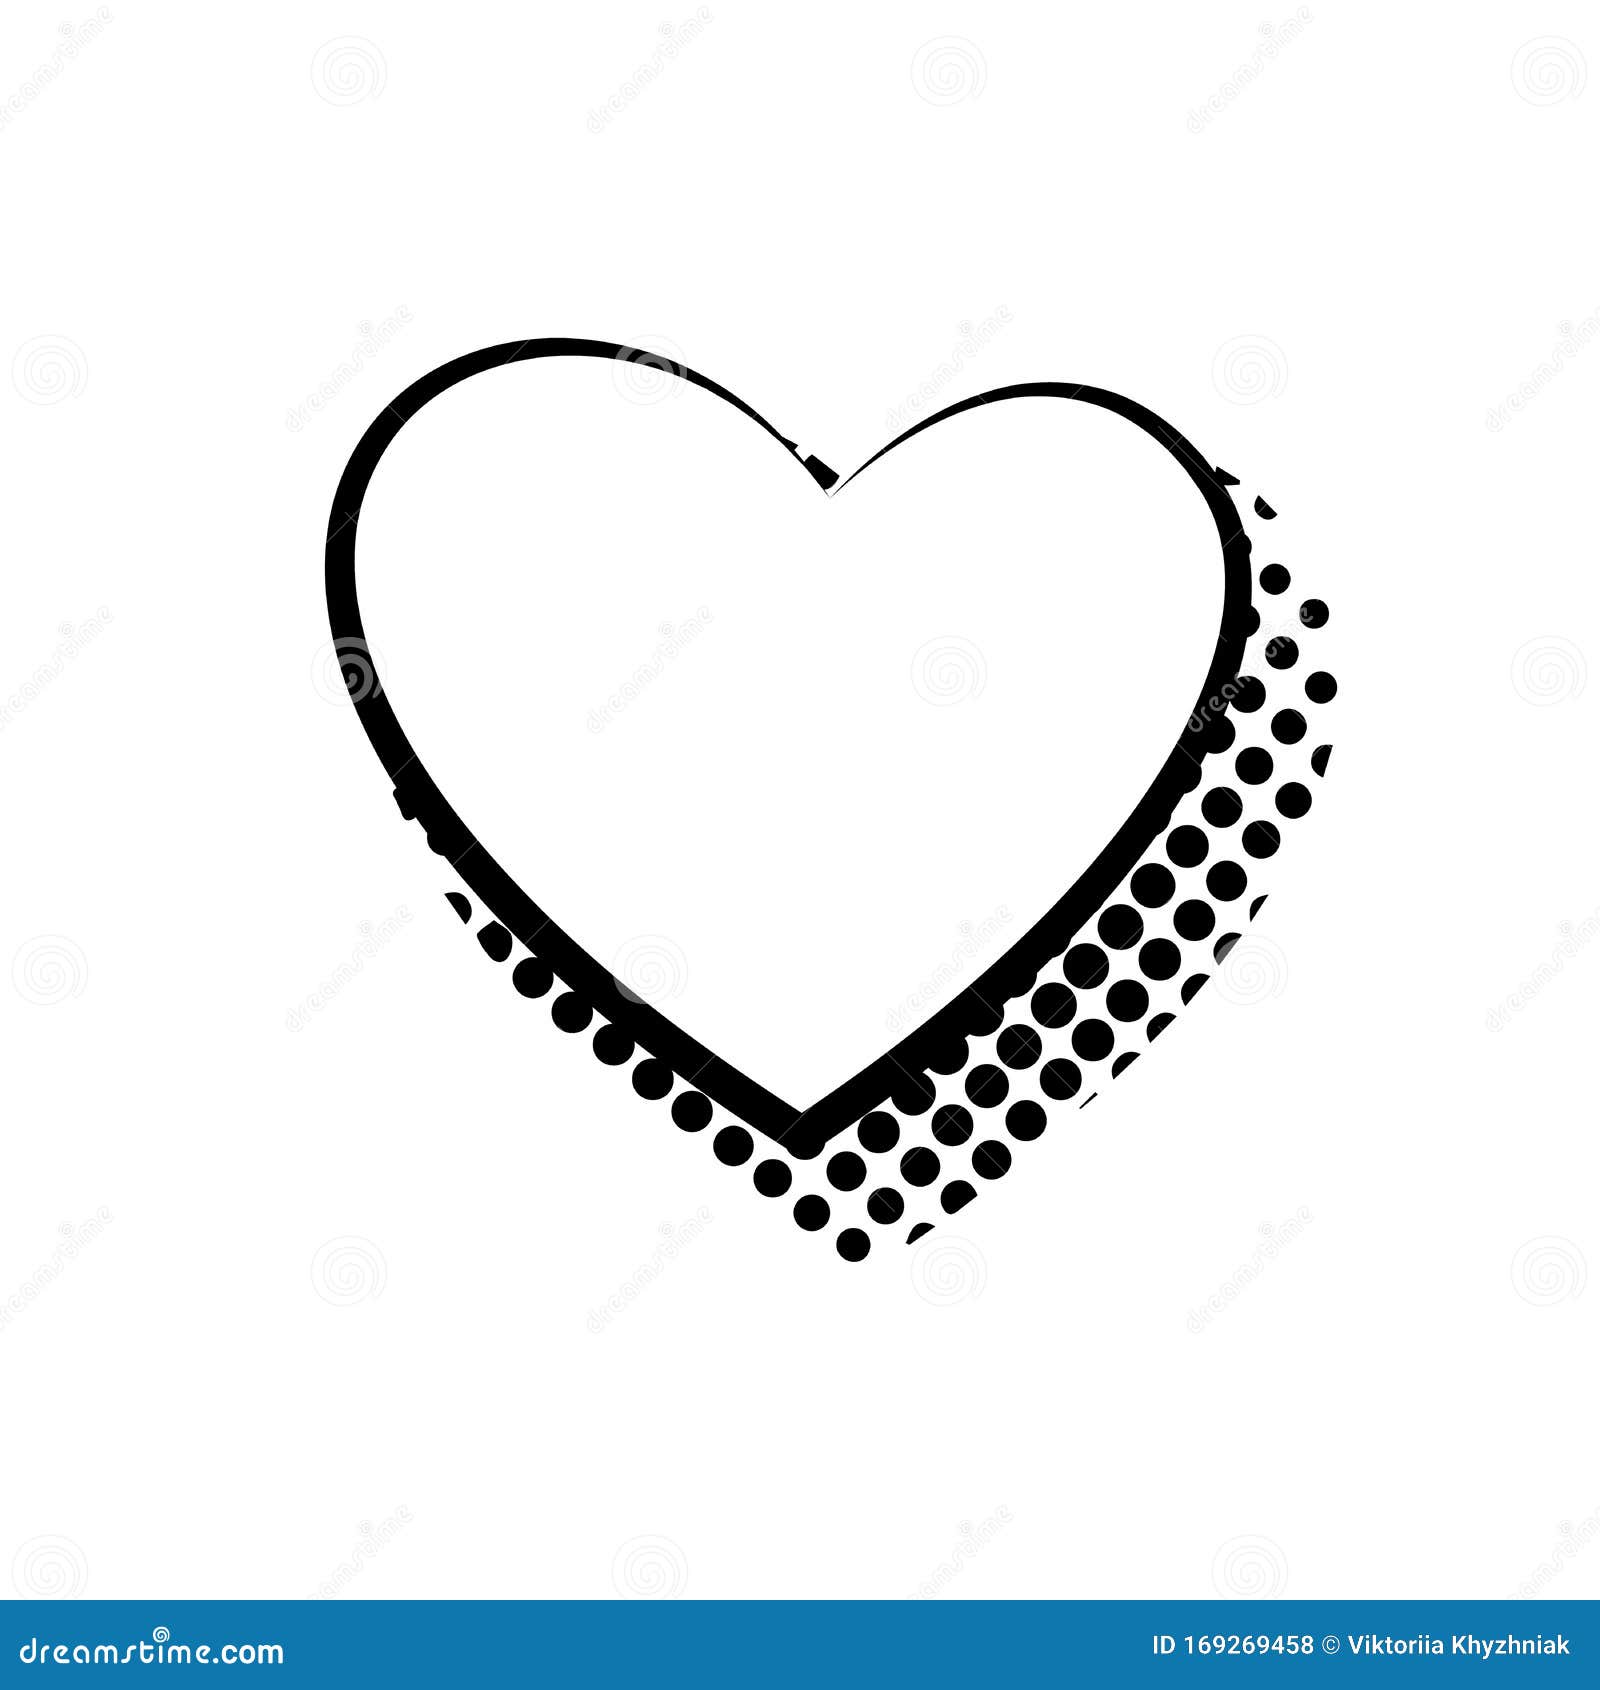 Dialogue Bubble in Heart Form Vector Flat Isolated Stock Vector ...